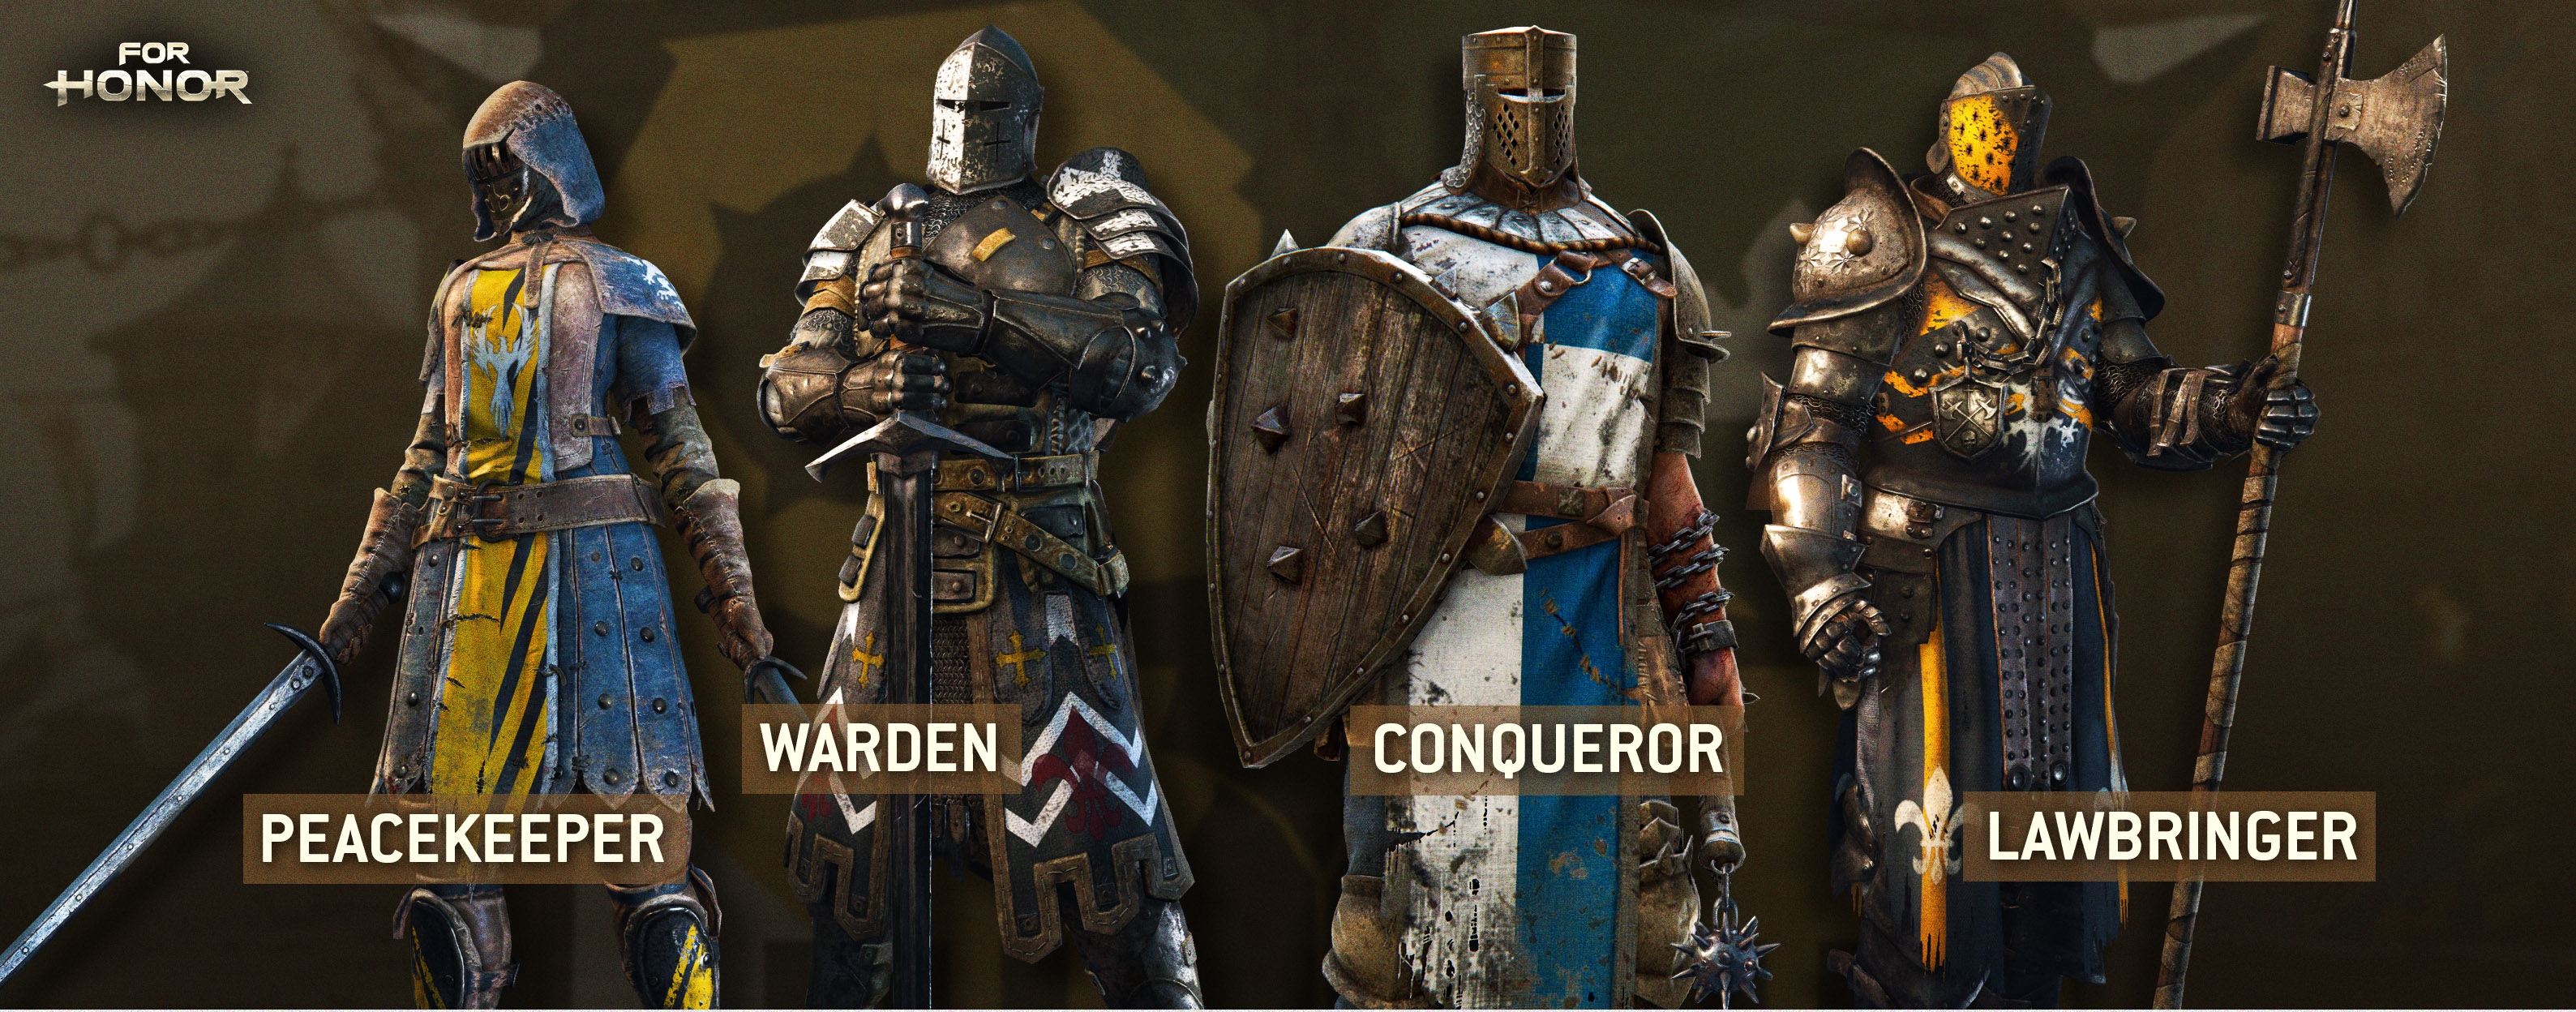 For Honor – Heroes Fight to Claim Offerings in New Tribute Mode | DeviceDaily.com